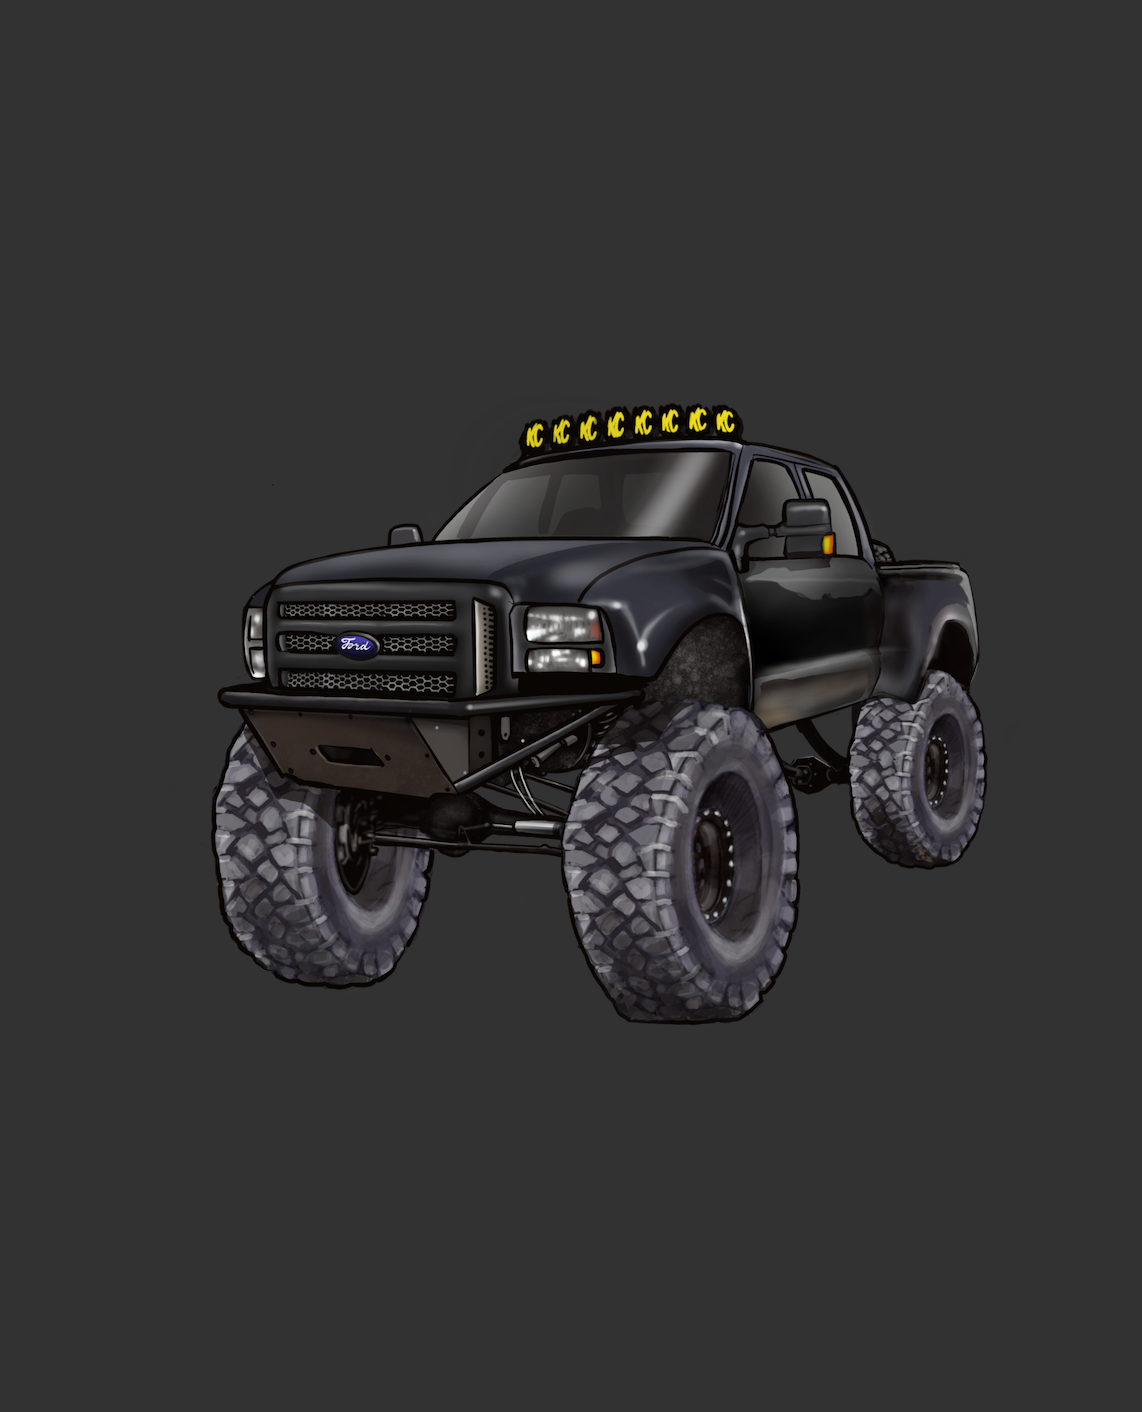 The 6.0 Prerunner Decal 4"x4"